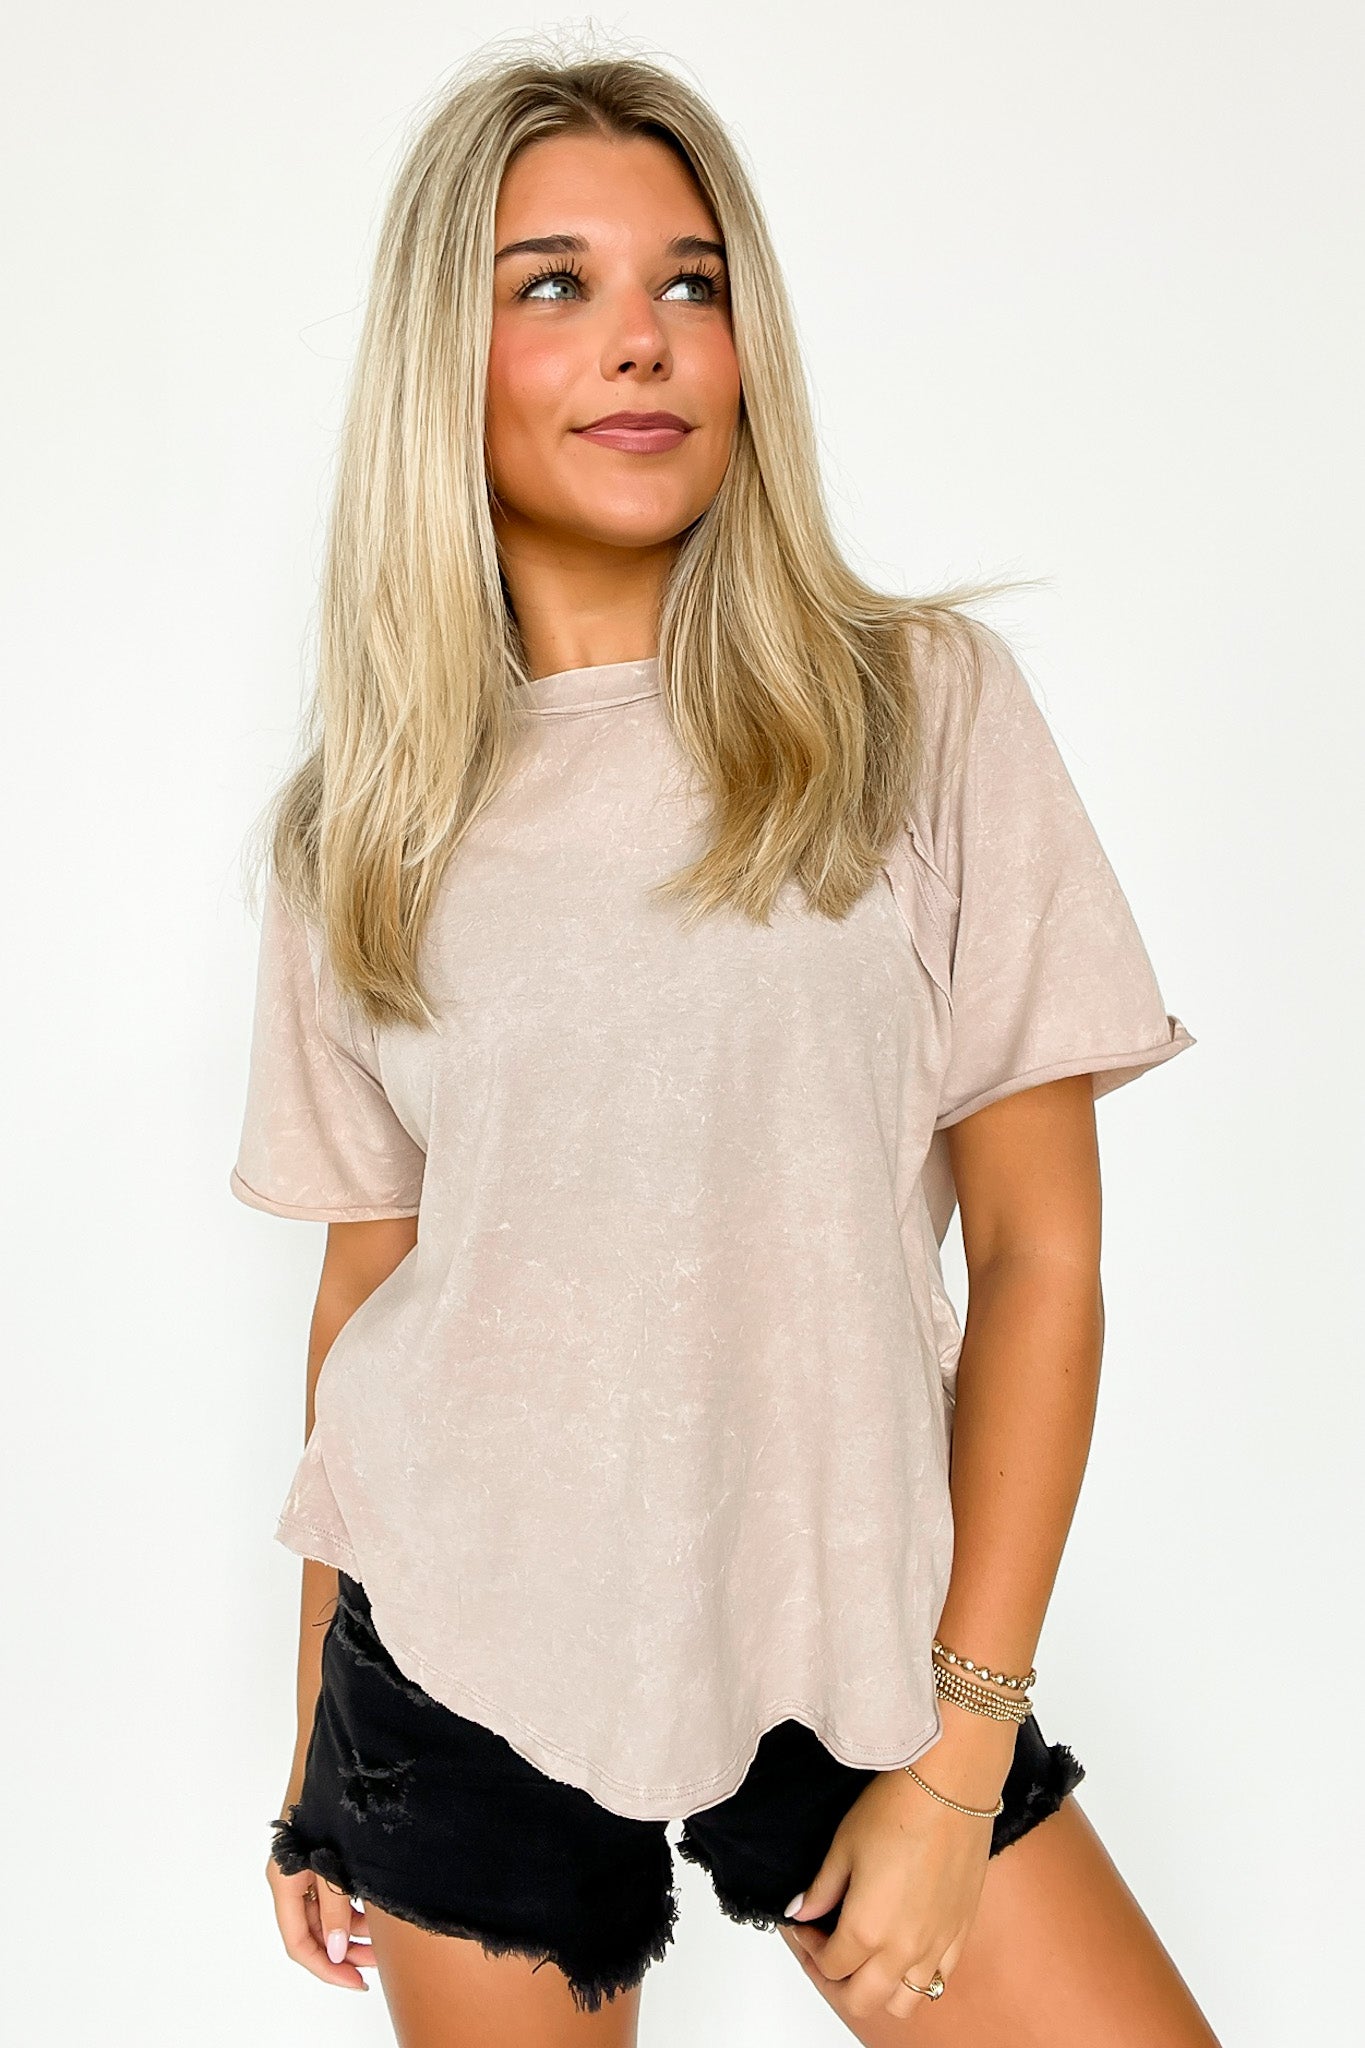  Carowyn Mineral Wash Relaxed Fit Top - Madison and Mallory